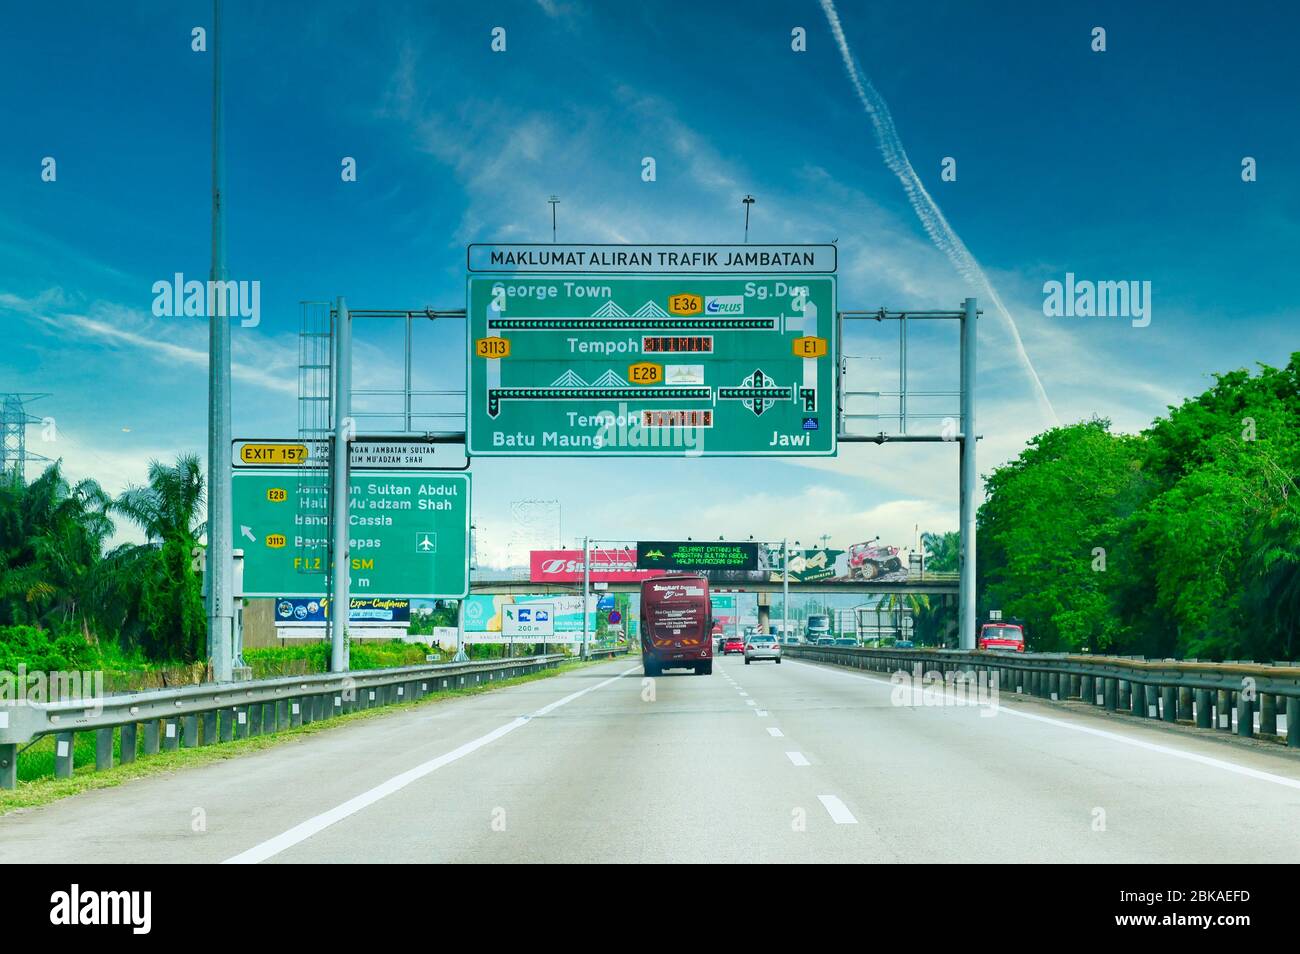 Northbound on the E1 toll highway at Simpang Ampat 500m before Exit 157 to E28 / Penang Bridge, showing road signs and traffic on a sunny day with blu Stock Photo